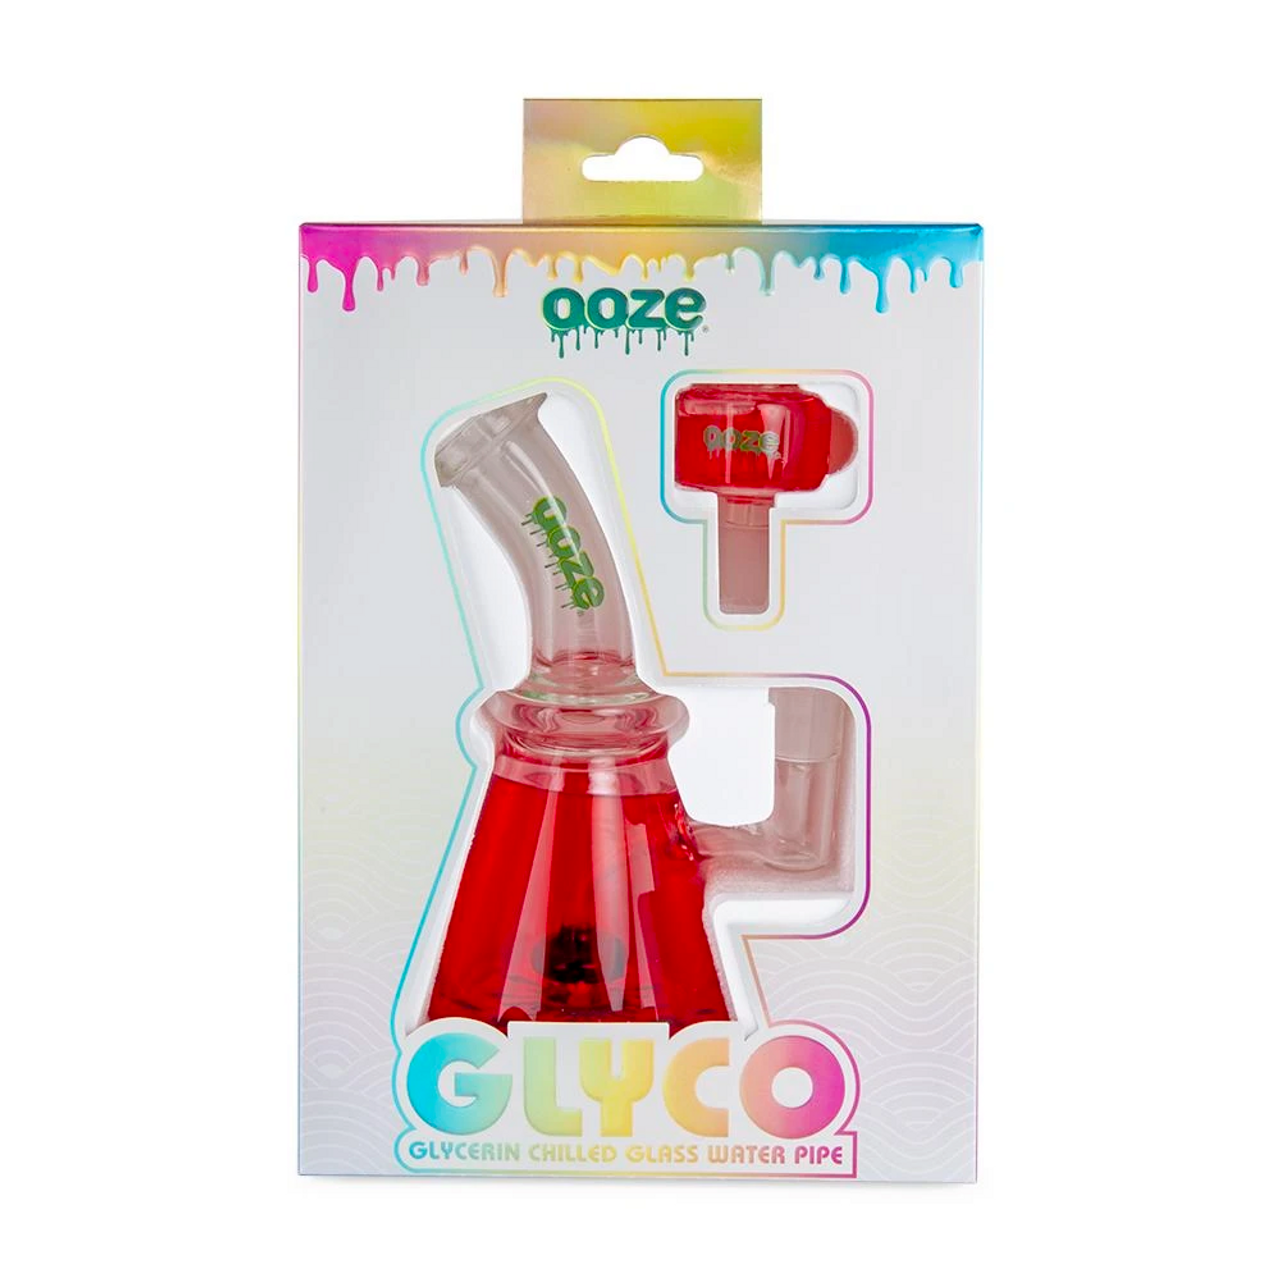  Ooze Glyco Glycerin Chilled Glass Water Pipe (Single  Unit) - Water Pipes / Wholesale Water Pipes